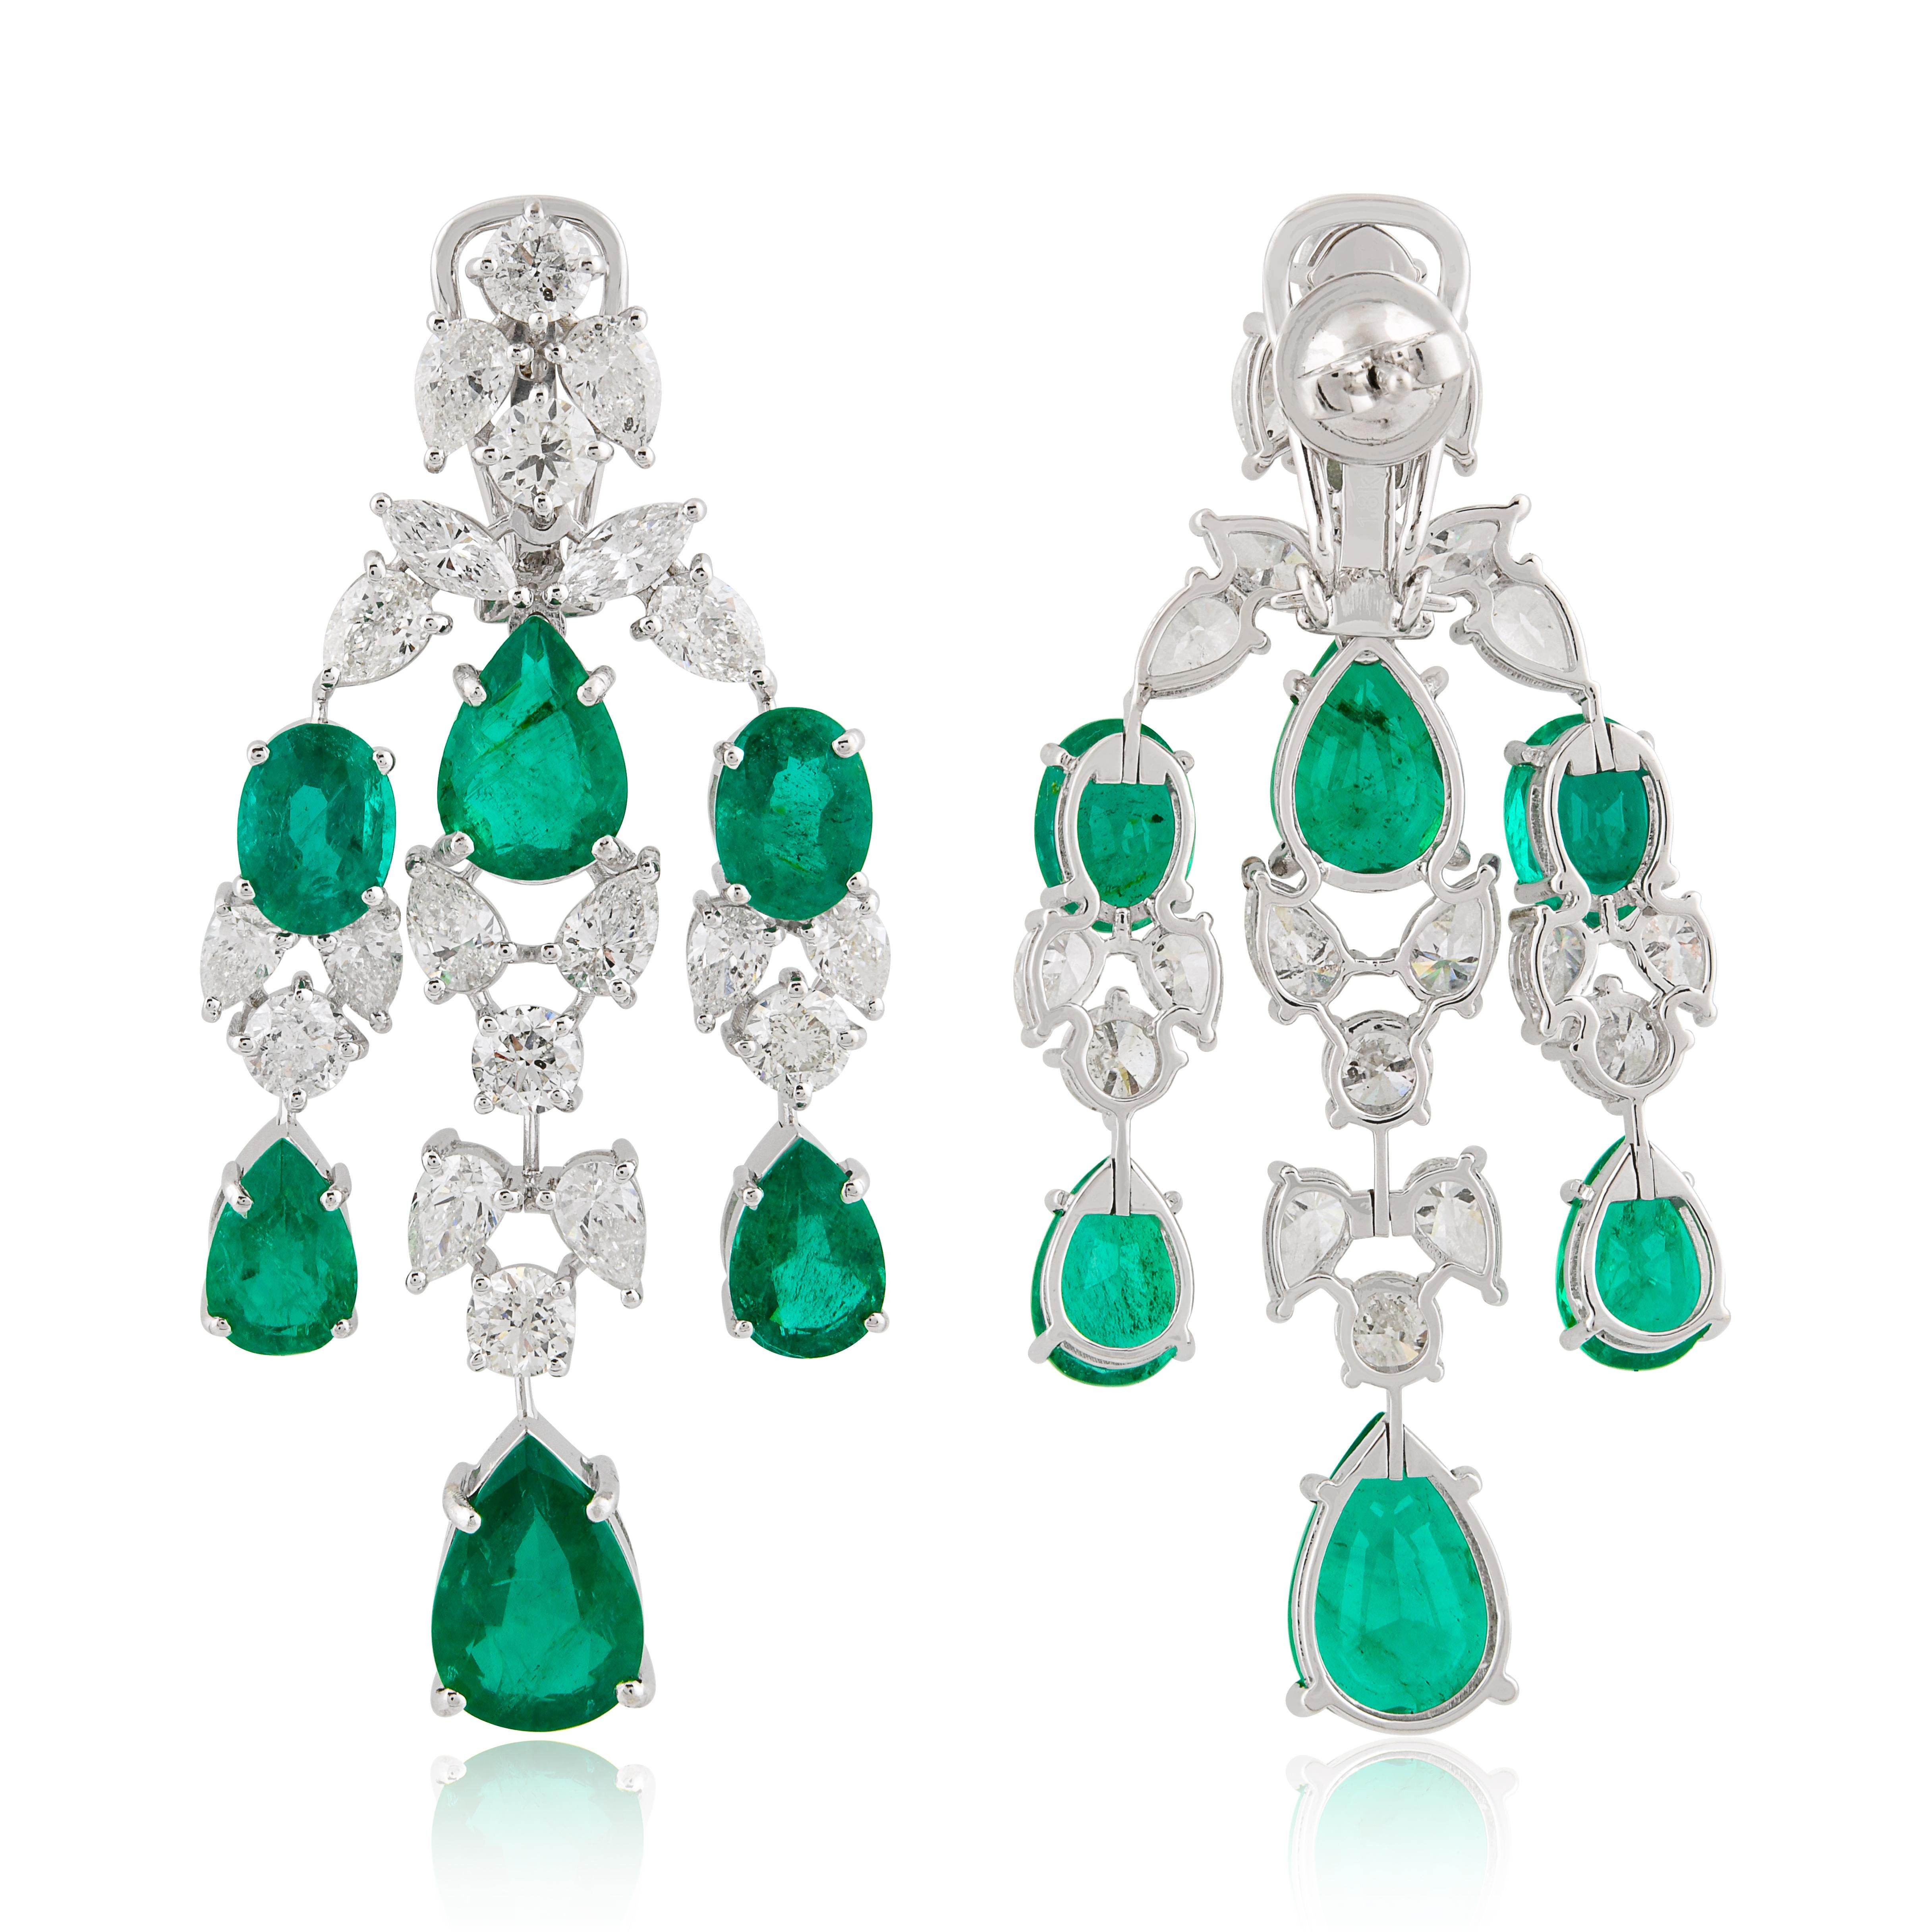 Item Code :- SEE-11585B
Gross Wt :- 20.18 gm
14k White Gold Wt :- 14.69 gm
Diamond Wt :- 9.30 ct  ( AVERAGE DIAMOND CLARITY SI1-SI2 & COLOR H-I )
Emerald Wt :- 18.16 ct
Earrings Length :- 57 mm approx.
✦ Sizing
.....................
We can adjust